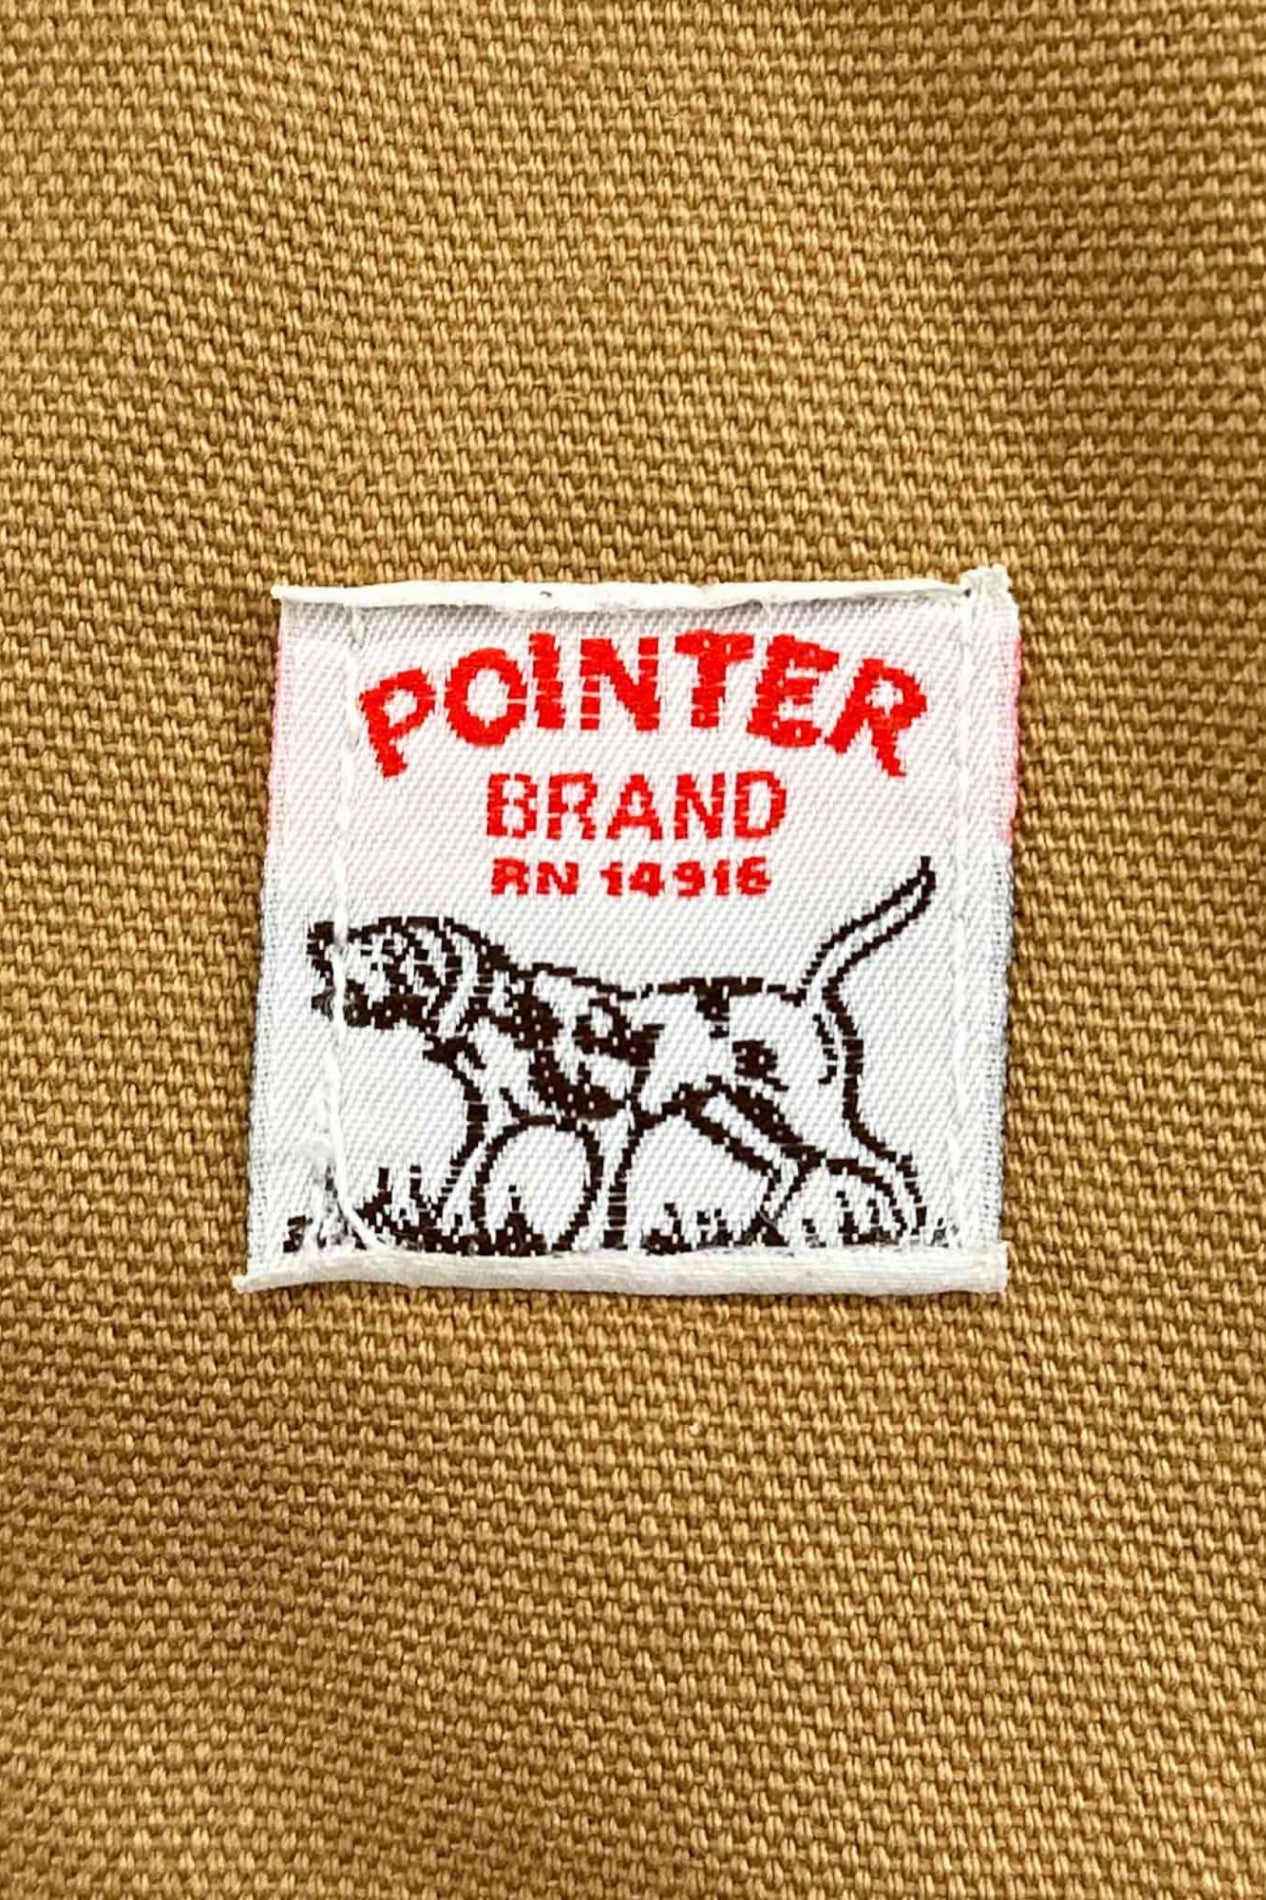 Made in USA POINTER BRAND jacket